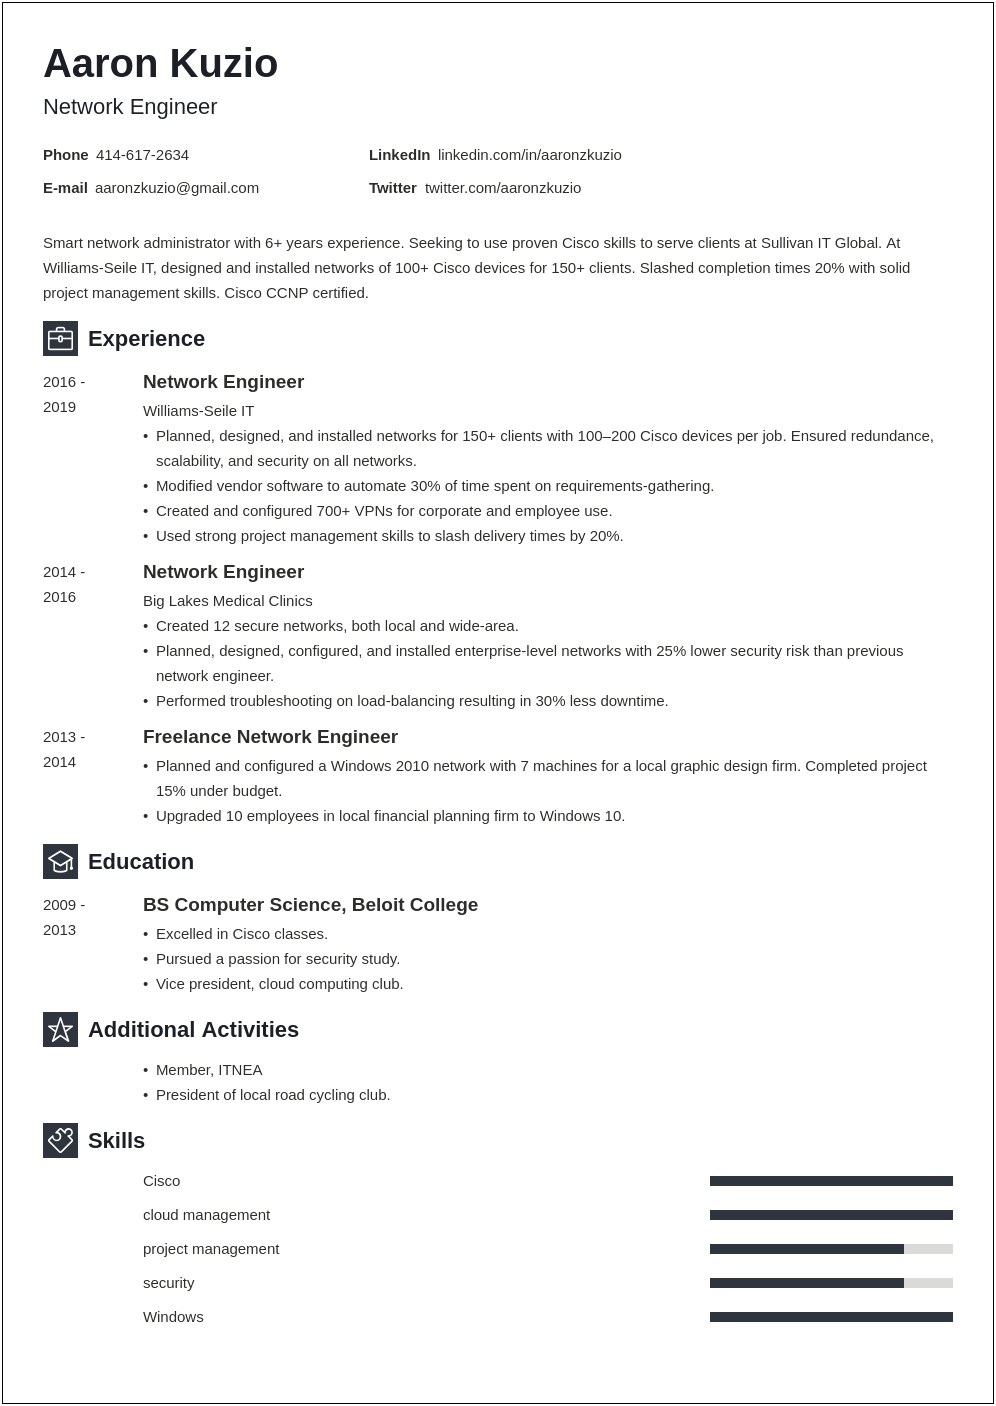 Sample Resume With Cpe Credits Completion